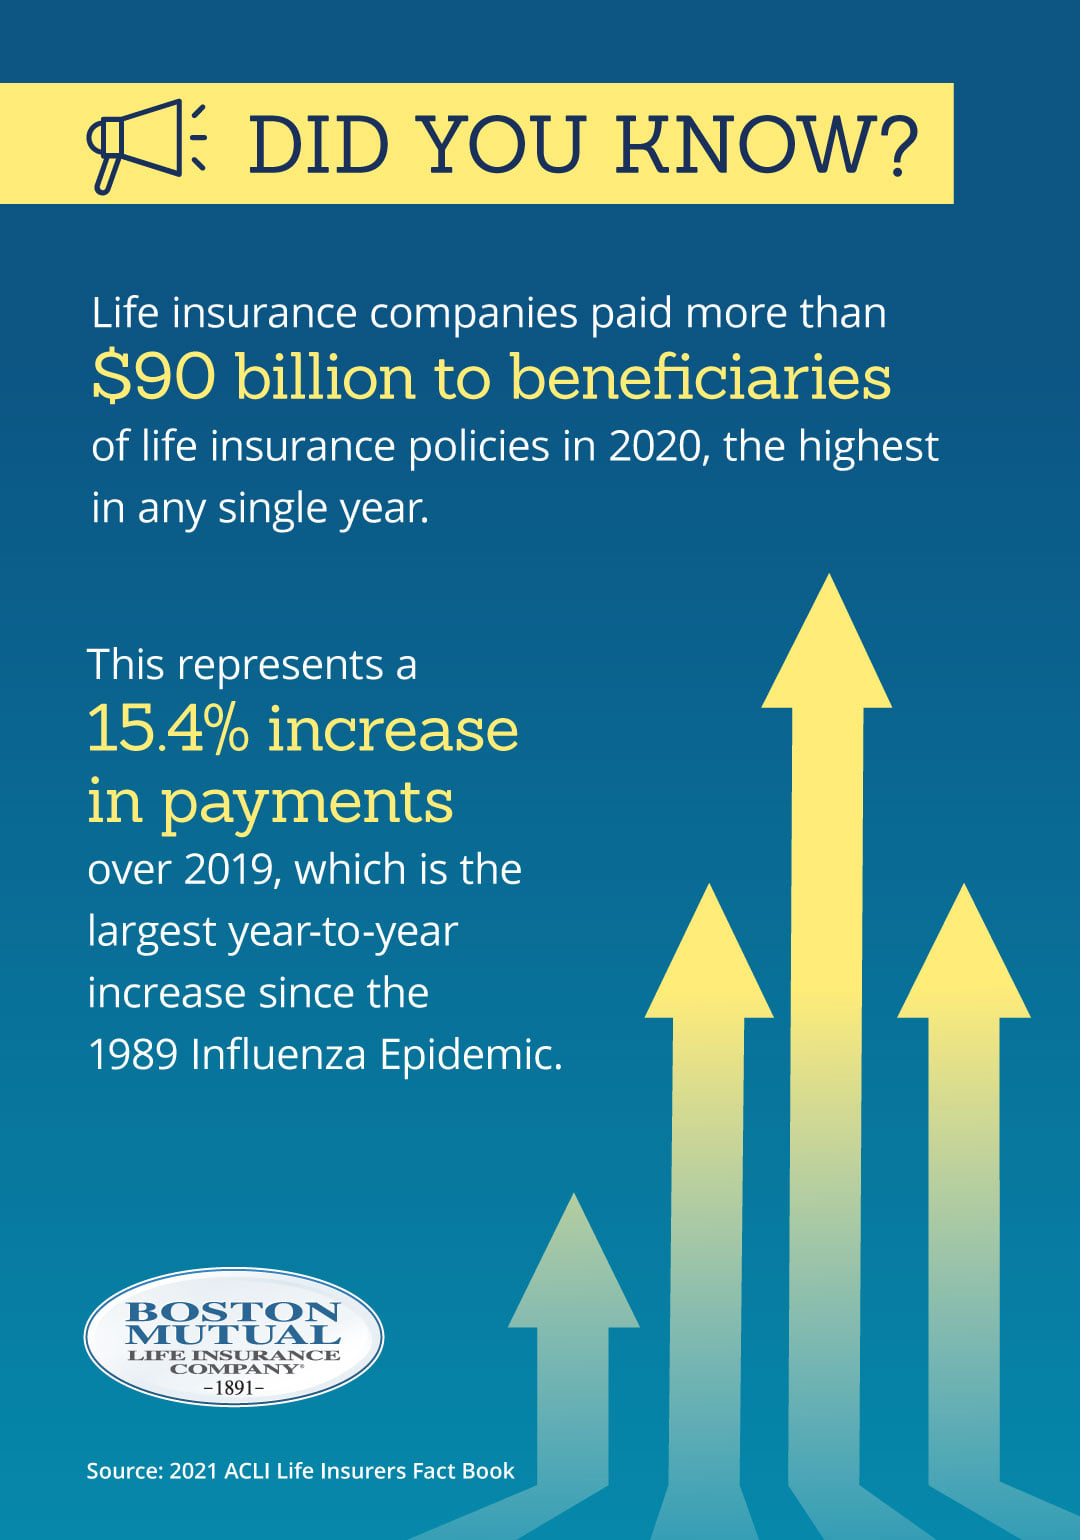 Life insurance companies paid more than $90 billion to beneficiaries of life insurance policies in 2020, the highest ever in any single year. This represents a 15.4% increase in payments over 2019, which is the largest year-to-year increase since the 1918 Influenza Epidemic.